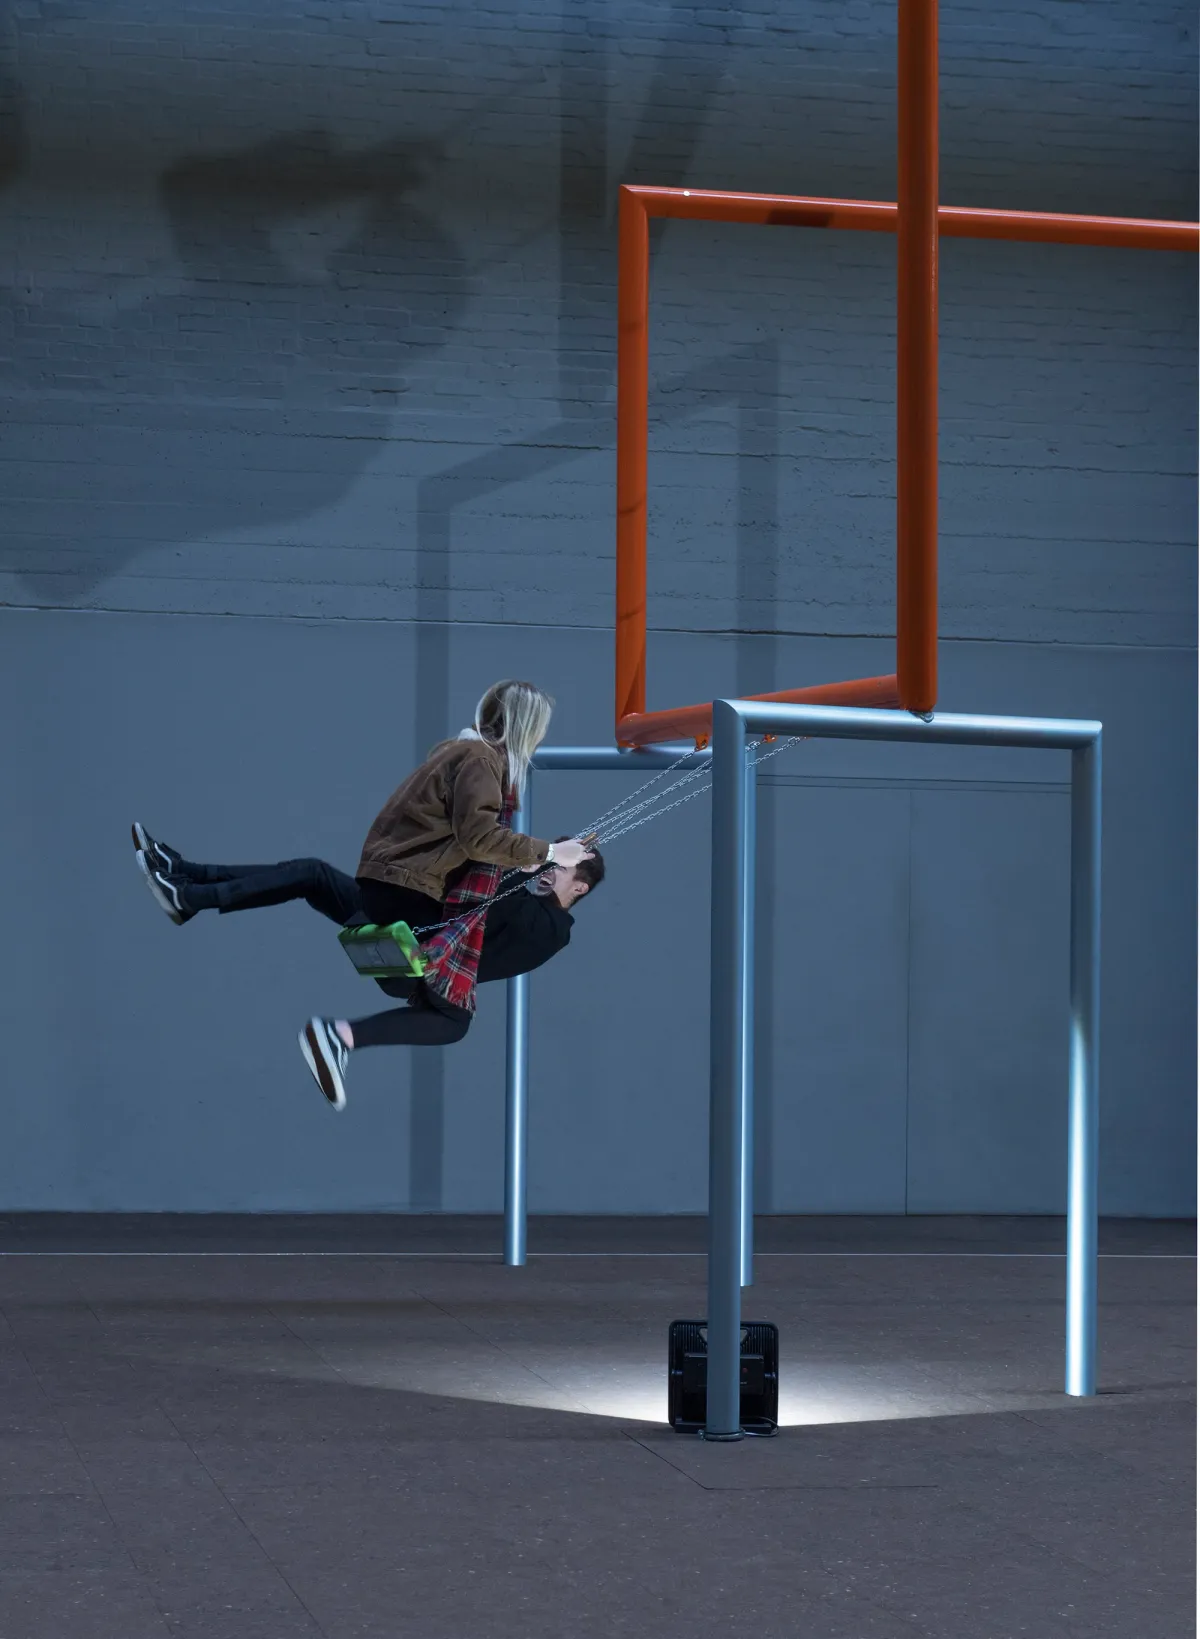 Two individuals swinging on swings suspended from orange and grey pipes in a spacious art gallery.